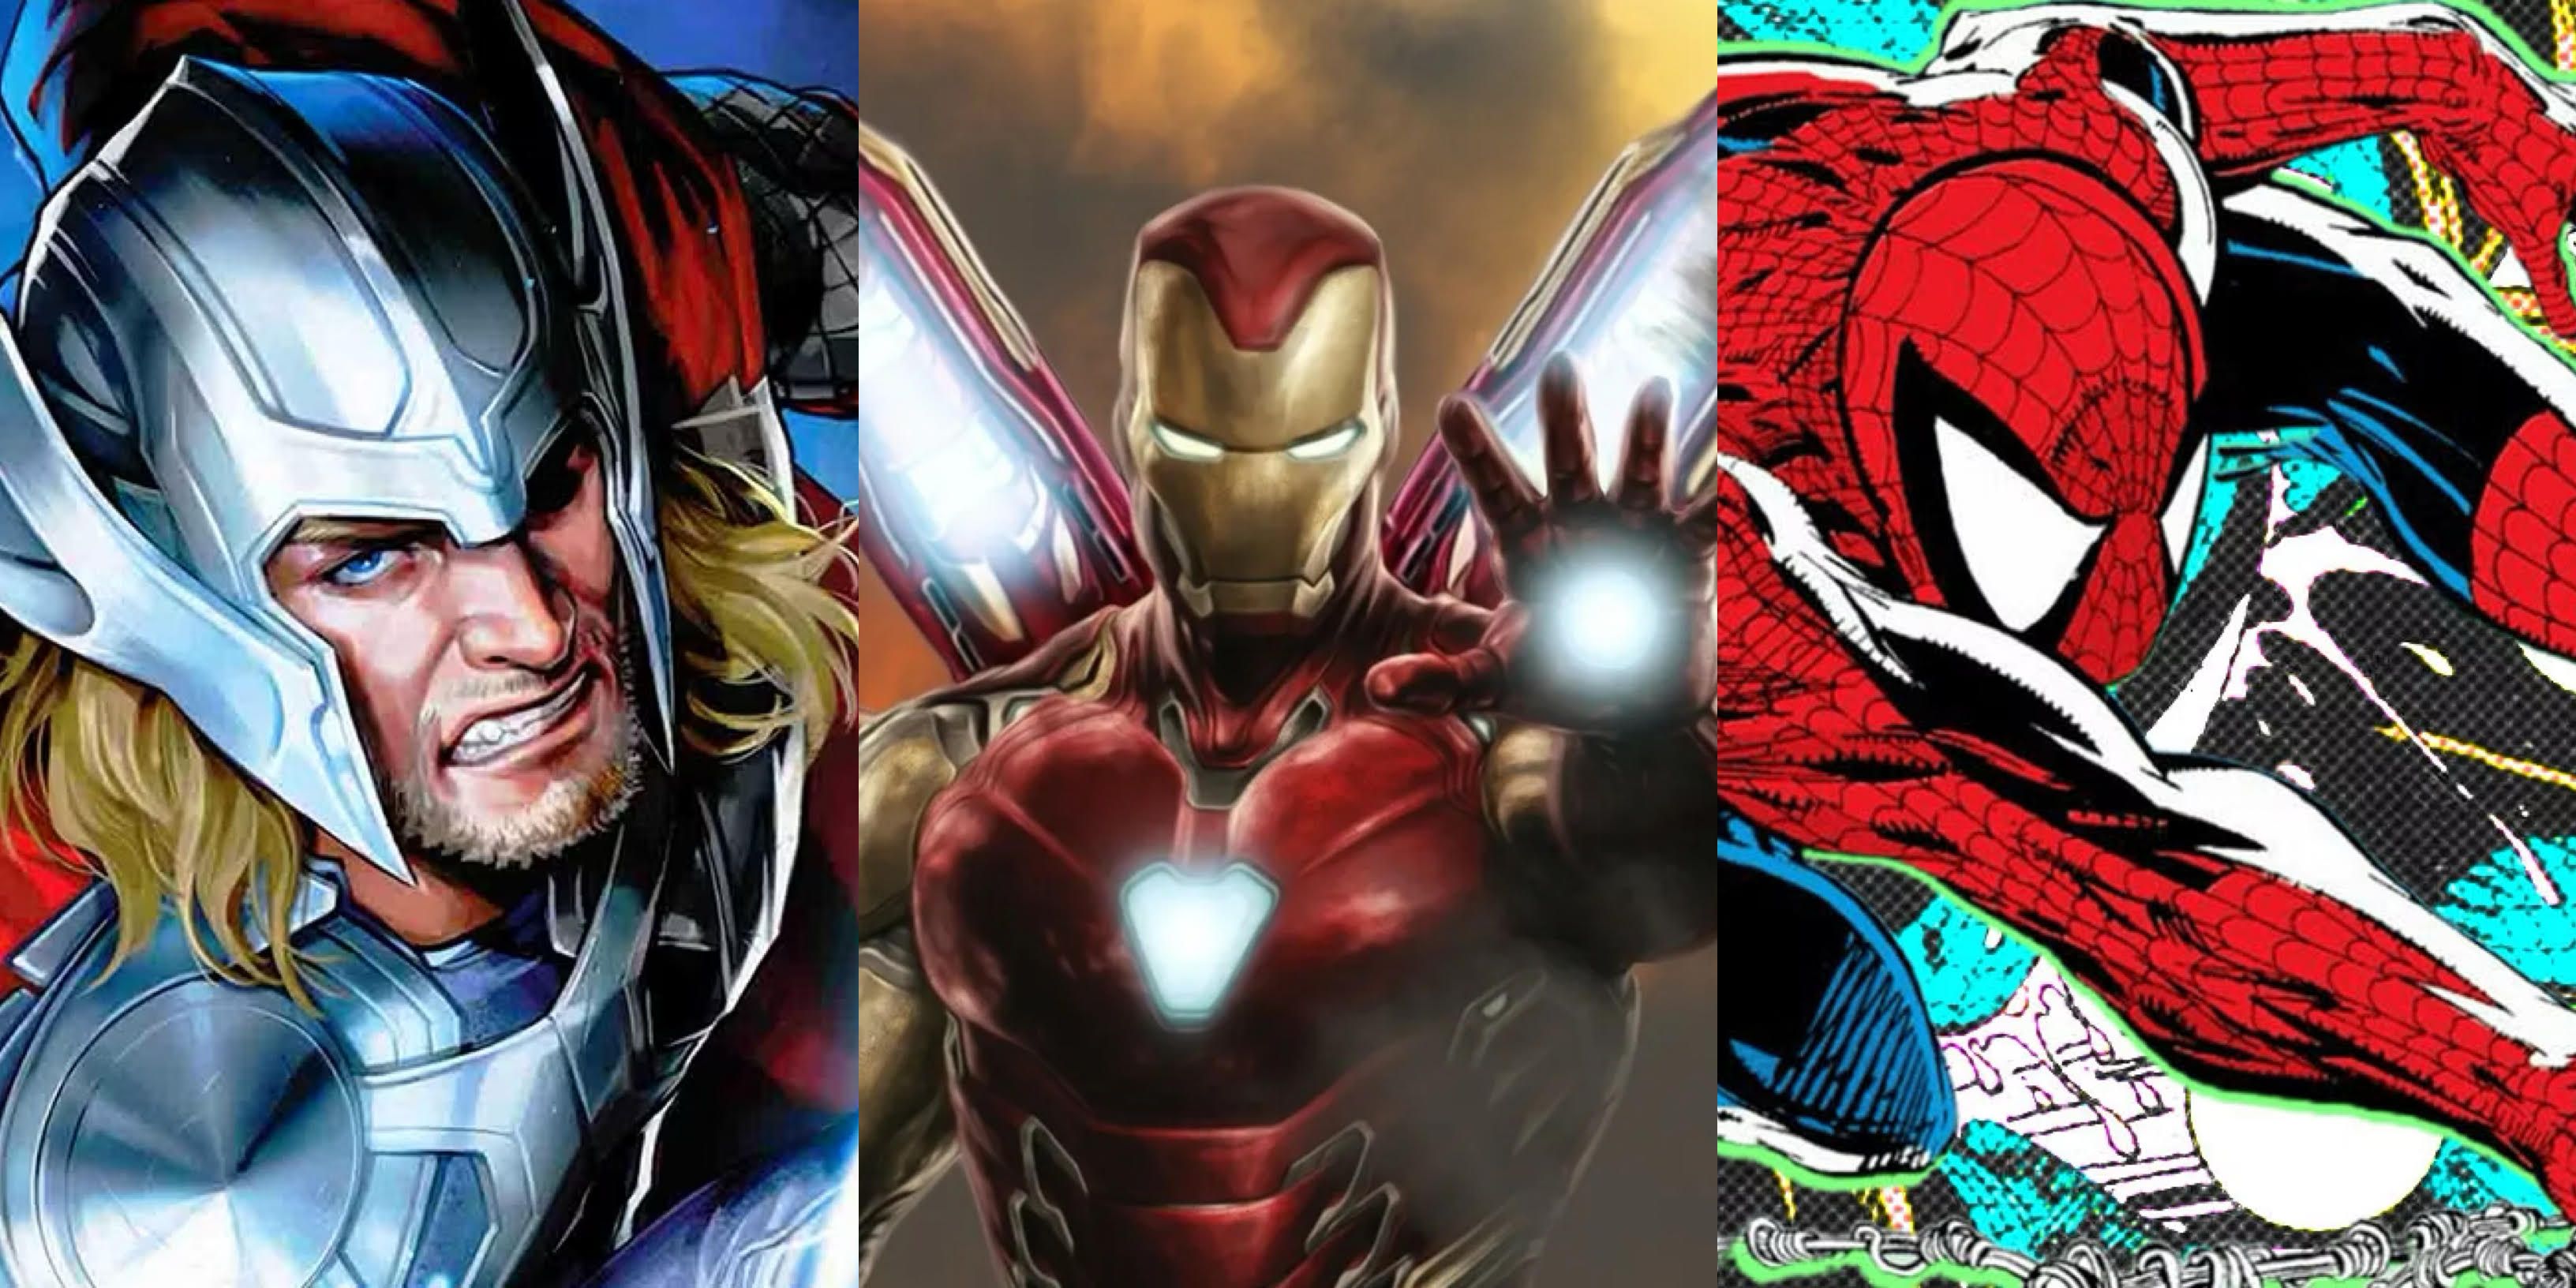 Heroes Who Hate Iron-Man: Thor (left), Iron-Man (middle), Spider-Man (right)